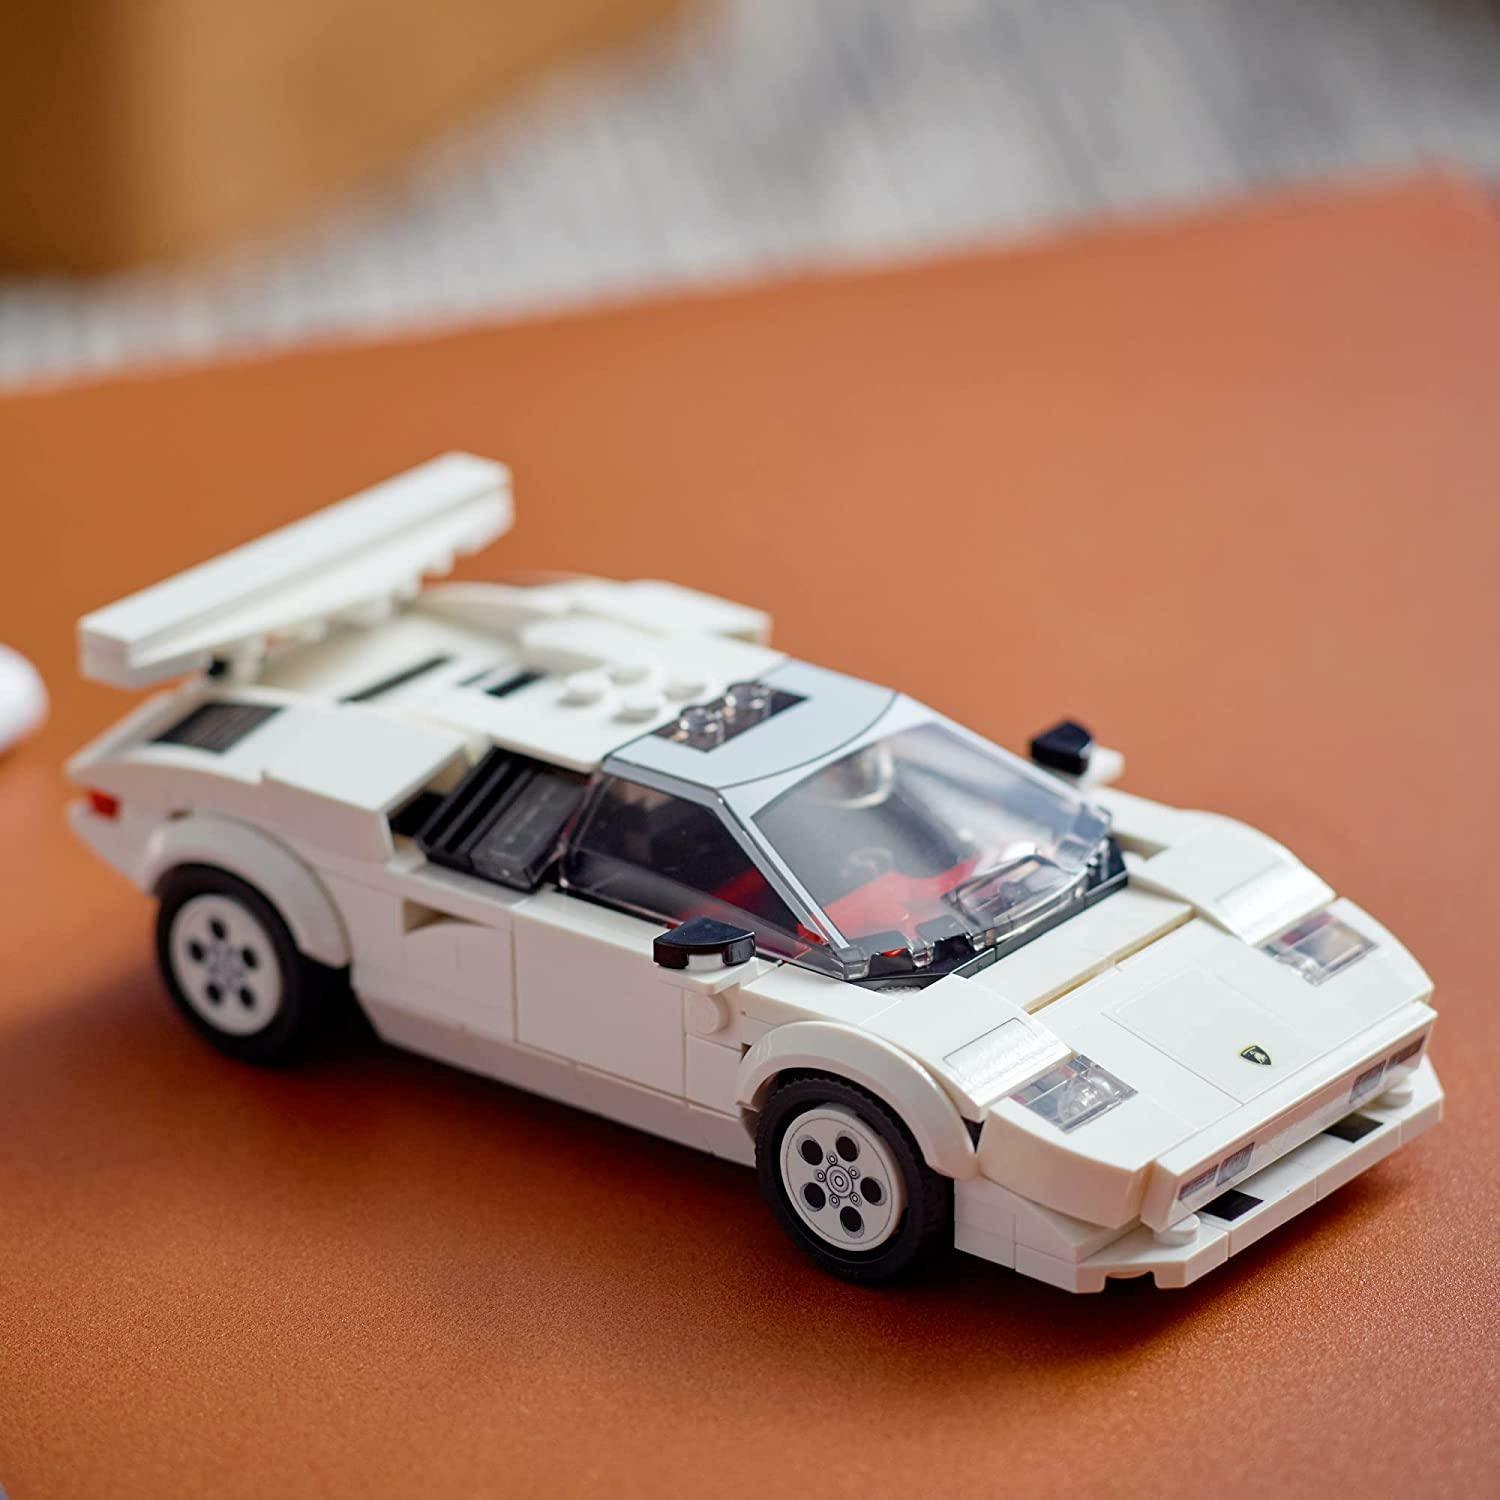 LEGO Speed Champions Lamborghini Countach 76908 Building Kit; Collectible Model of the Iconic 1970’s Super Sports Car - BumbleToys - 8+ Years, 8-13 Years, Boys, LEGO, OXE, Pre-Order